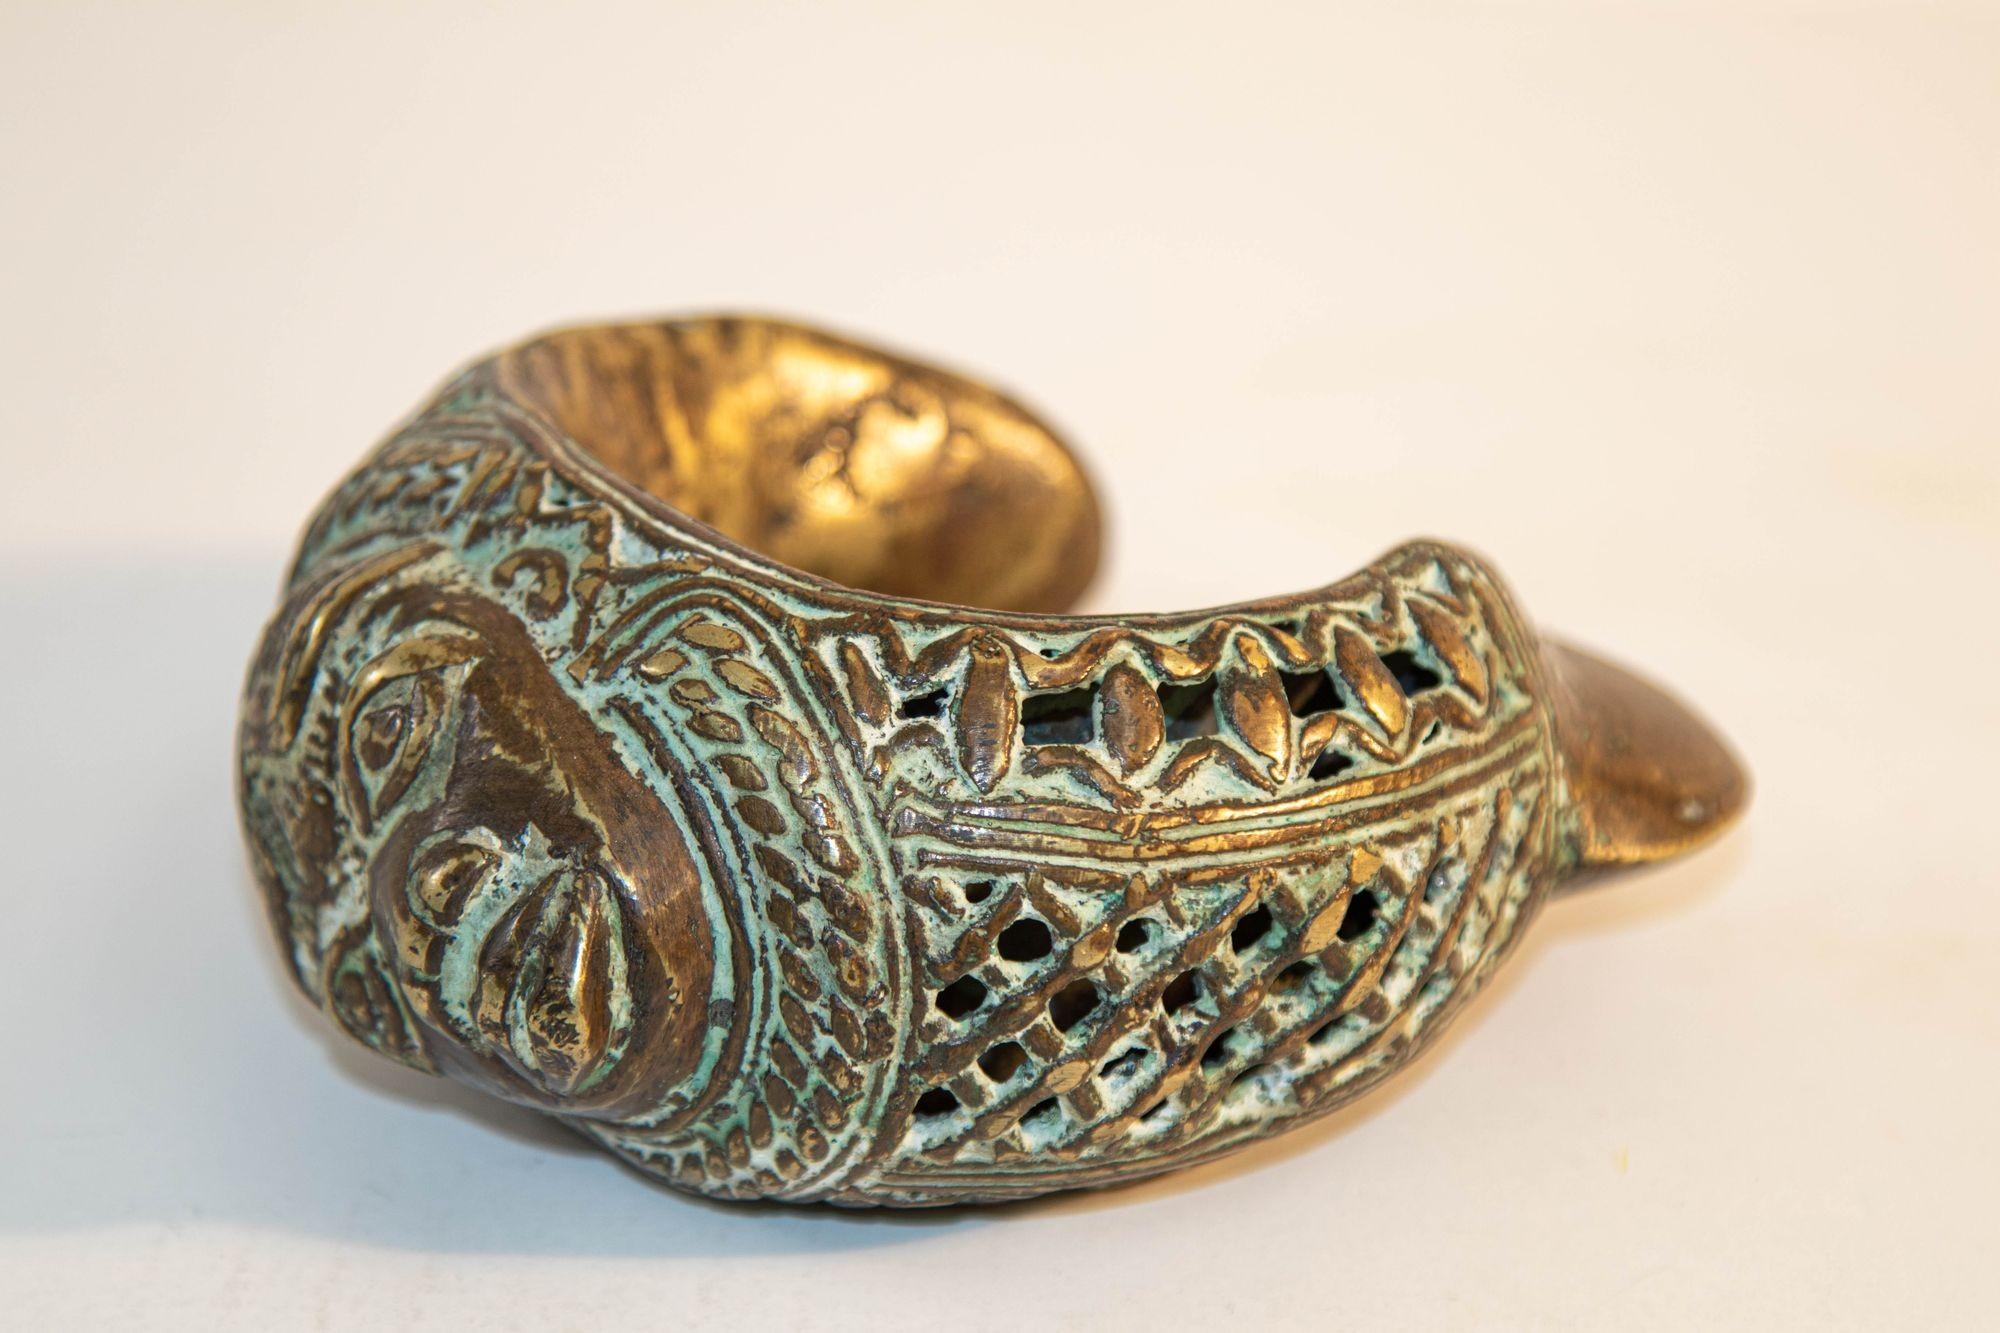 Antique African bronze bracelet currency bangle Tribal art.
High quality bronze currency bracelet from west Africa.
Traditionally used in monetary functions and exchange as well as body ornamentation.
Dimensions: length 5.5 in, depth 2 in, height